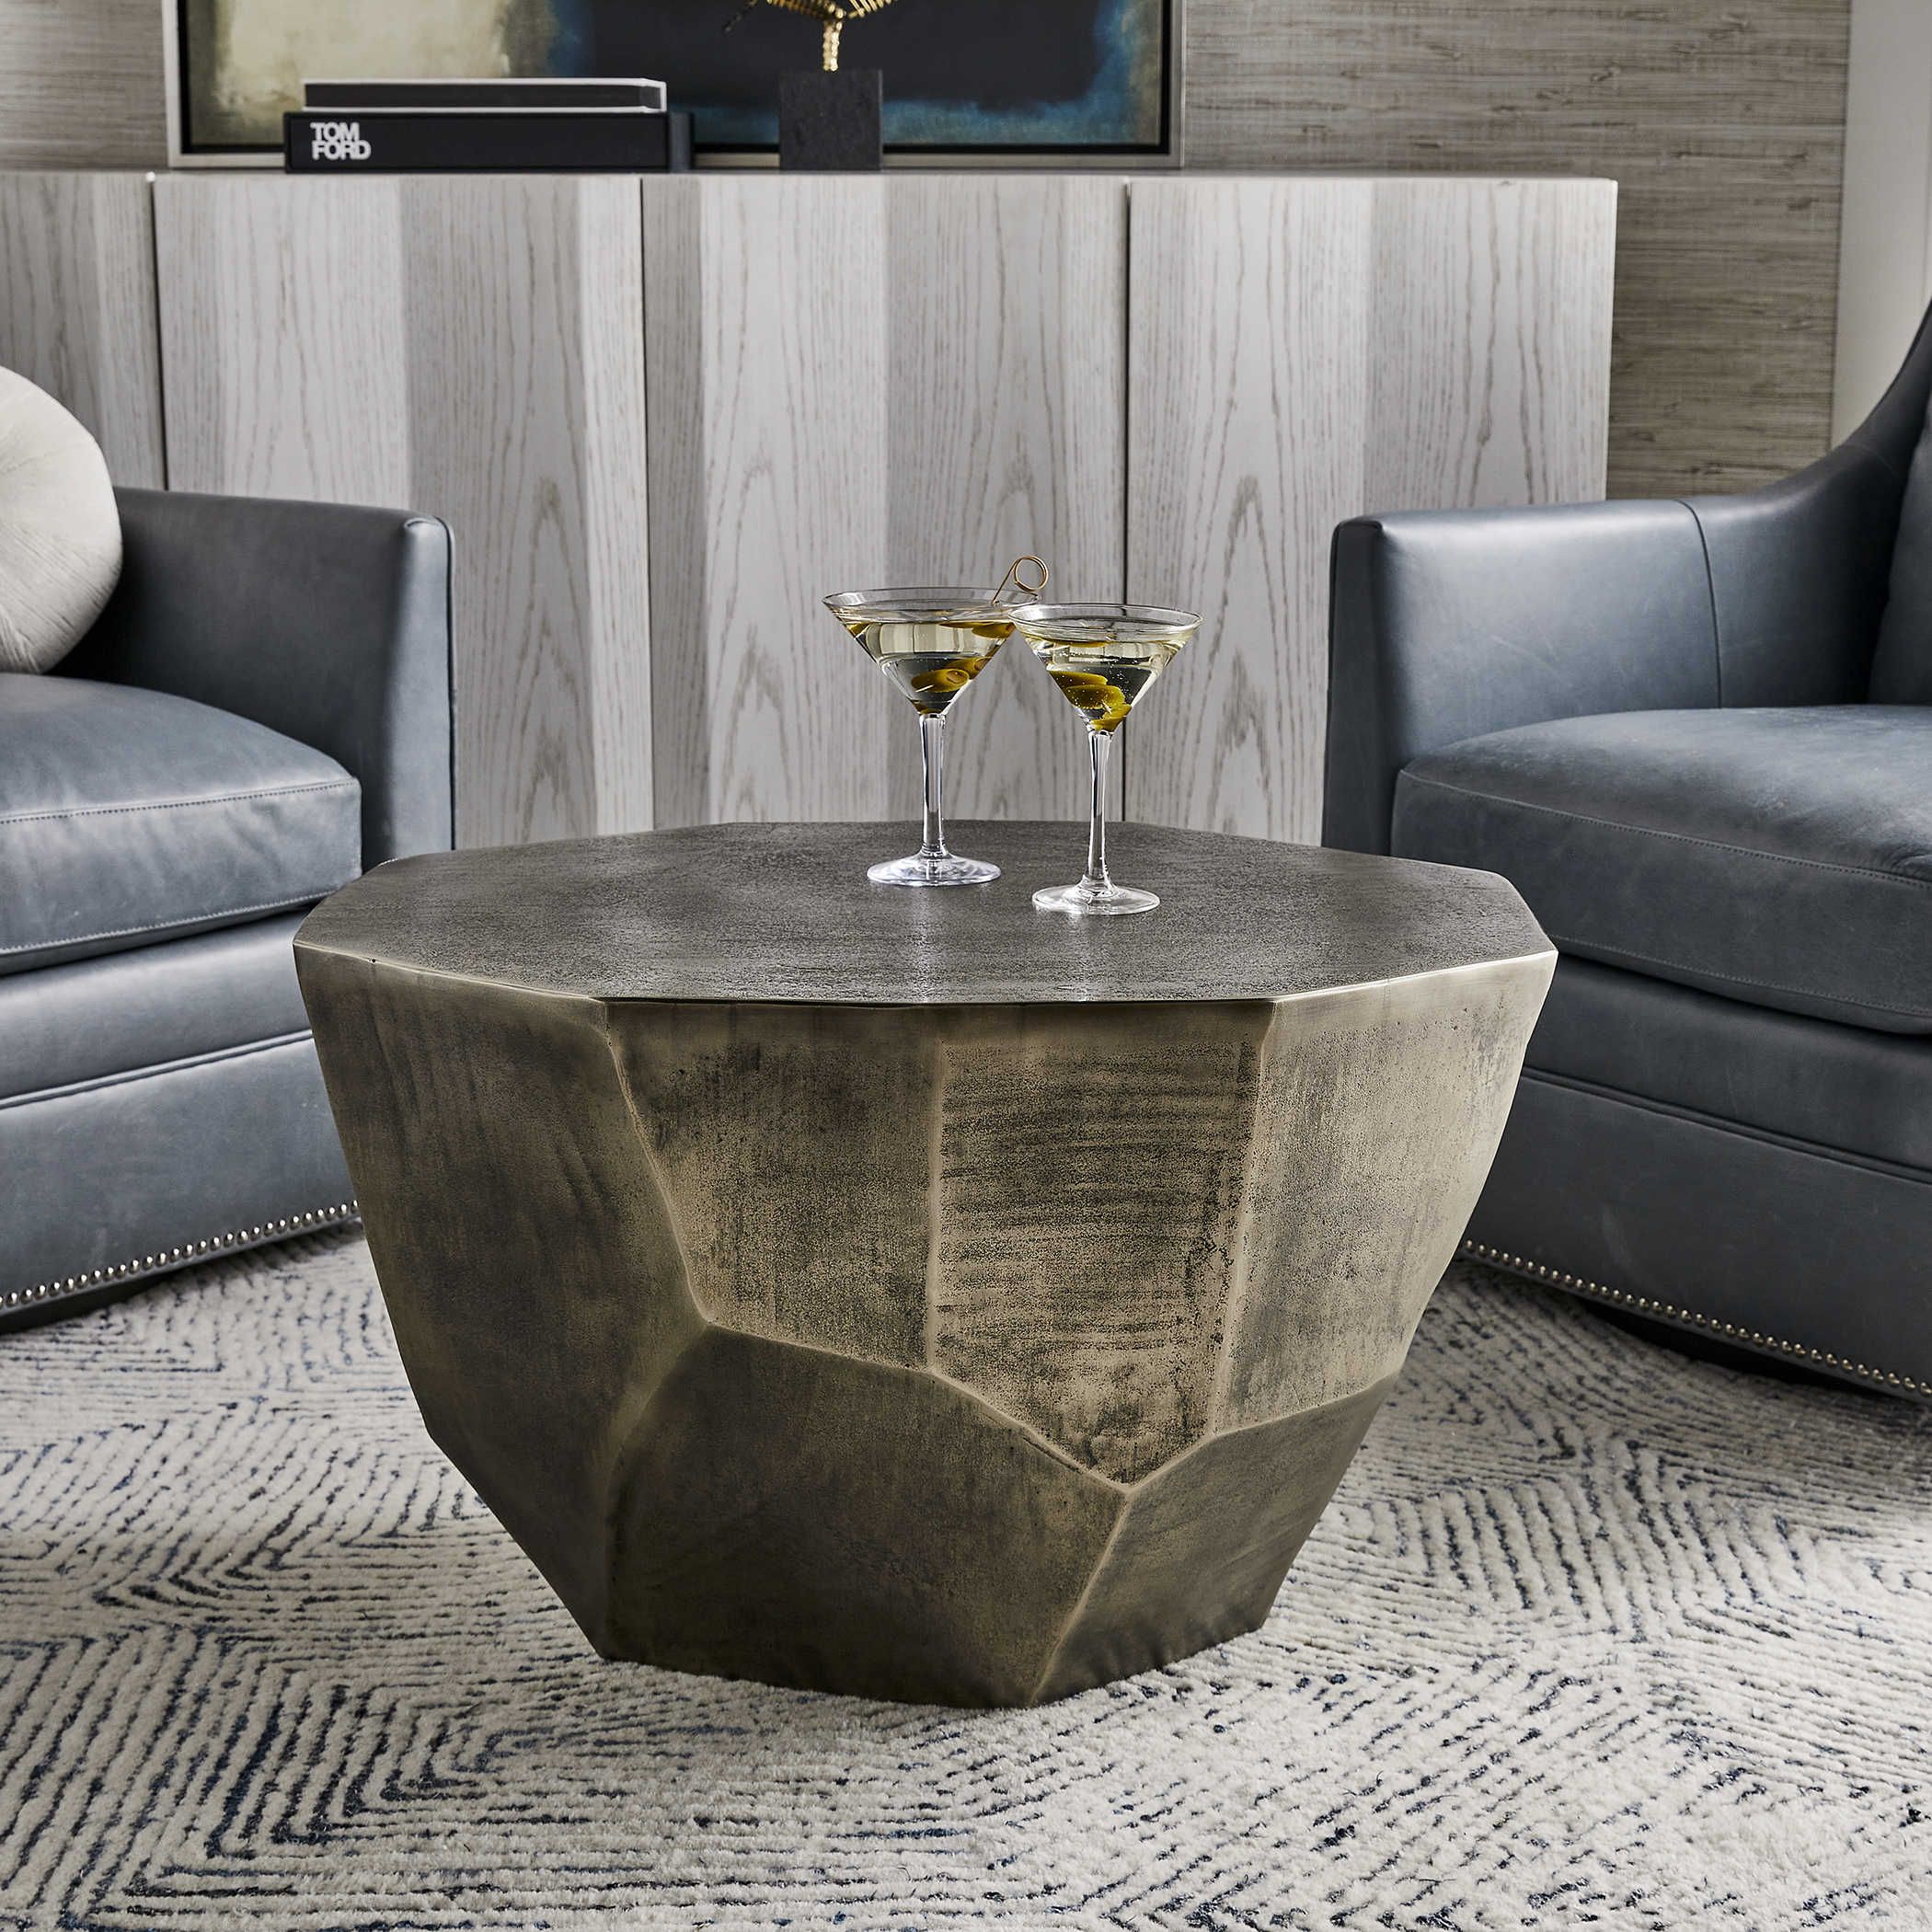 Cathenna Coffee Table – Antiqued Nickel Medium | Uttermost With Medium Coffee Tables (View 11 of 20)